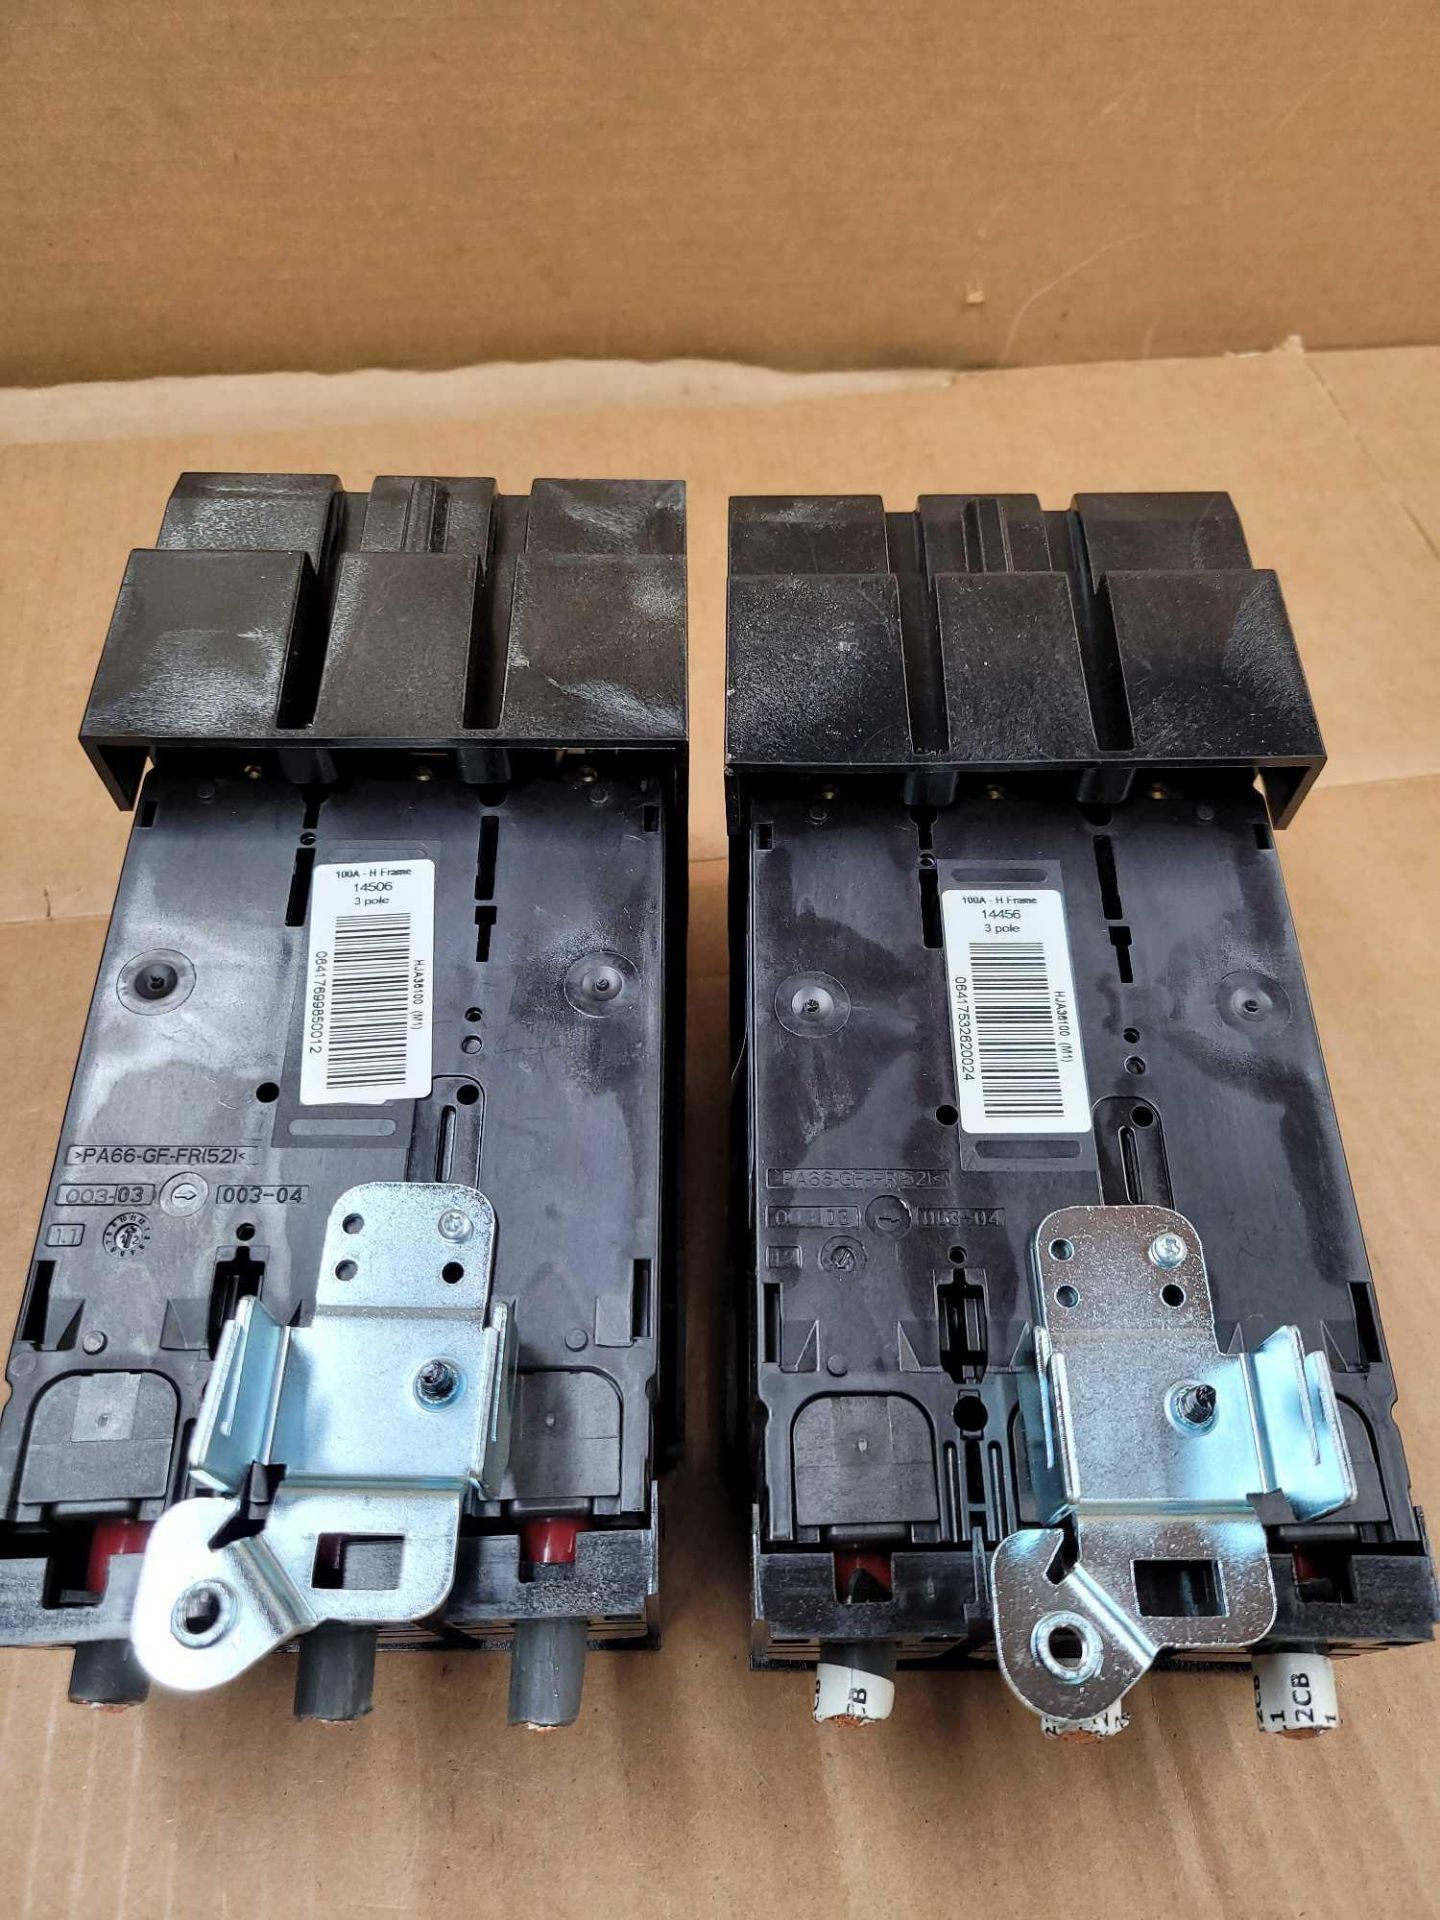 LOT OF 2 SQUARE D HJA36100 / 100 Amp Molded Case Circuit Breaker  /  Lot Weight: 9.4 lbs - Image 5 of 6